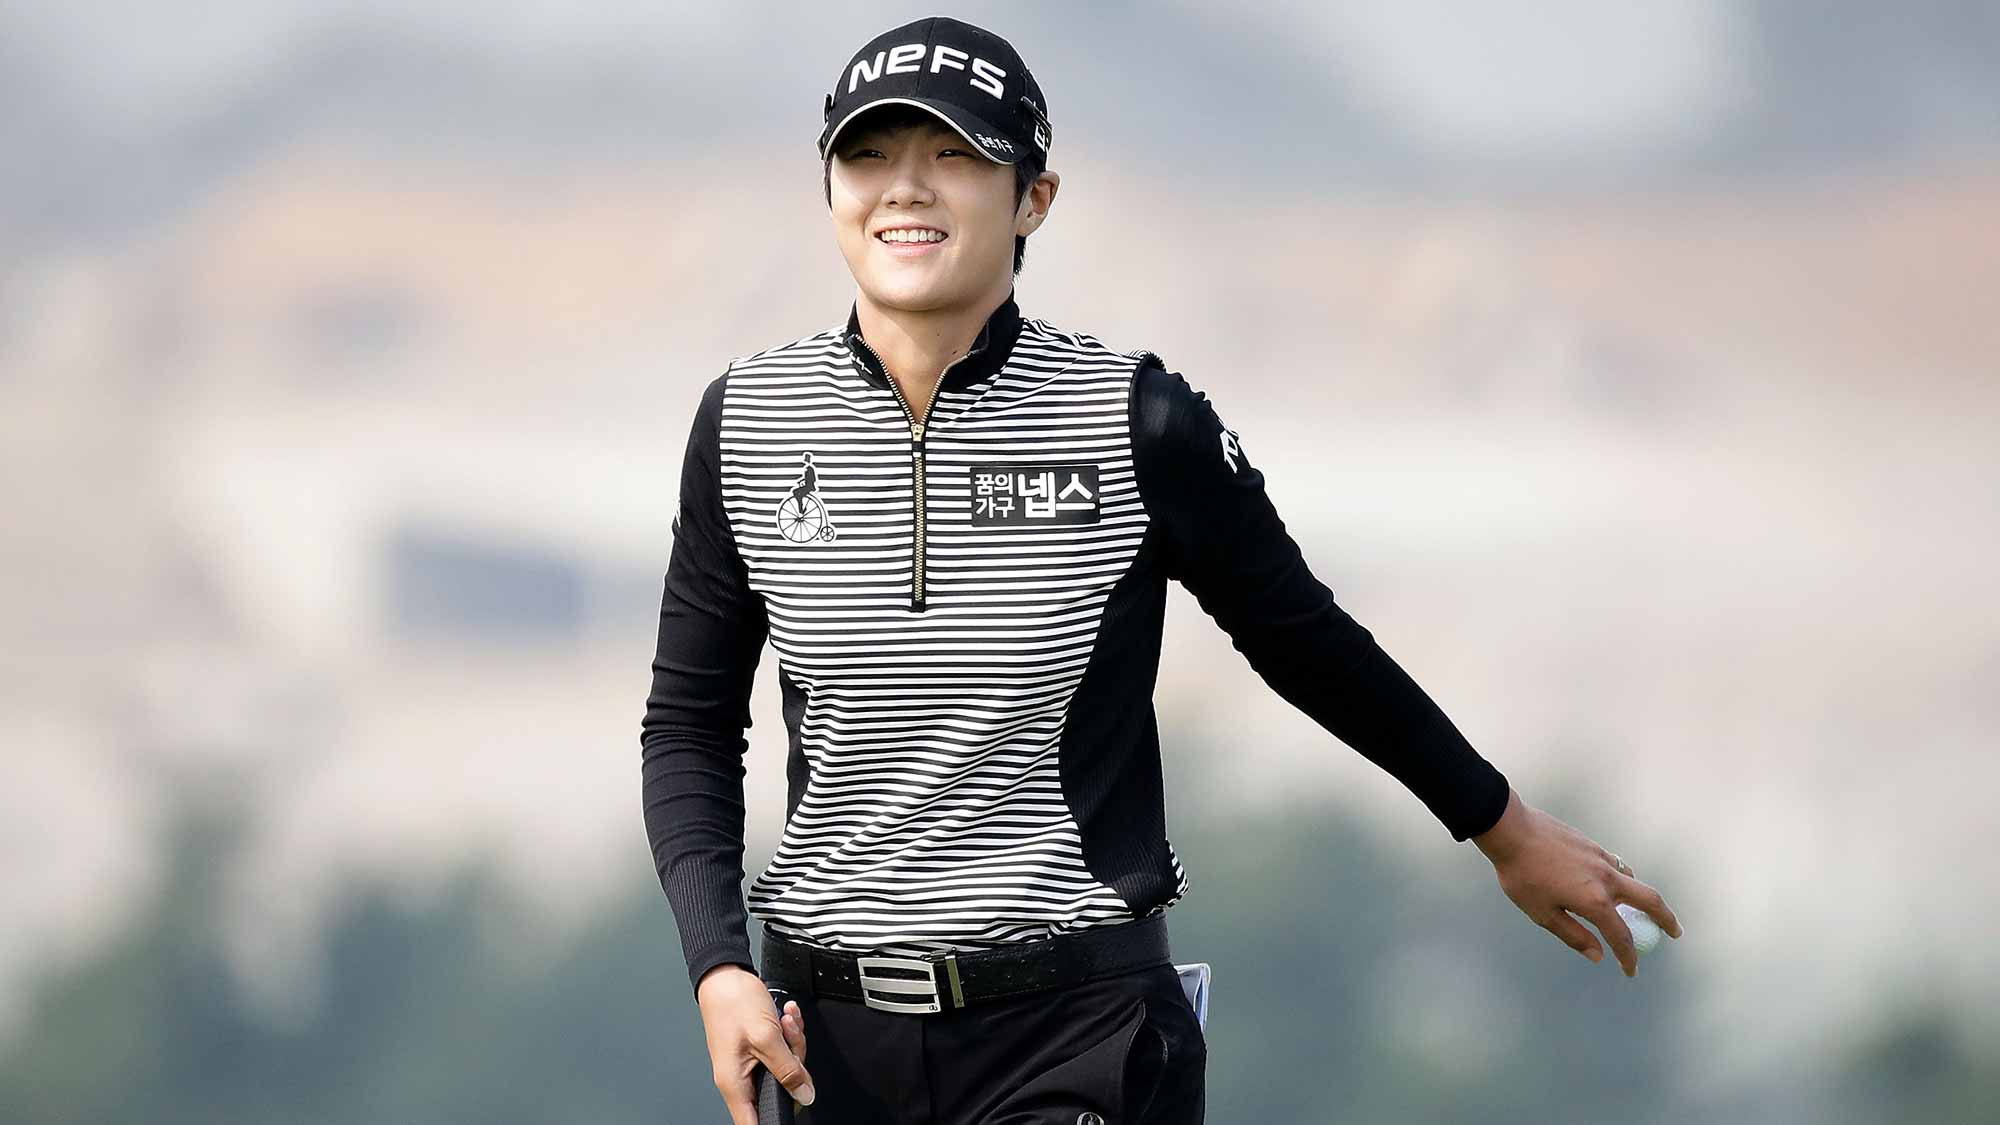 Sung-Hyun Park of South Korea reacts after a birdie putt on the 6th green during the second round of the LPGA KEB-Hana Bank Championship at the Sky 72 Golf Club Ocean Course